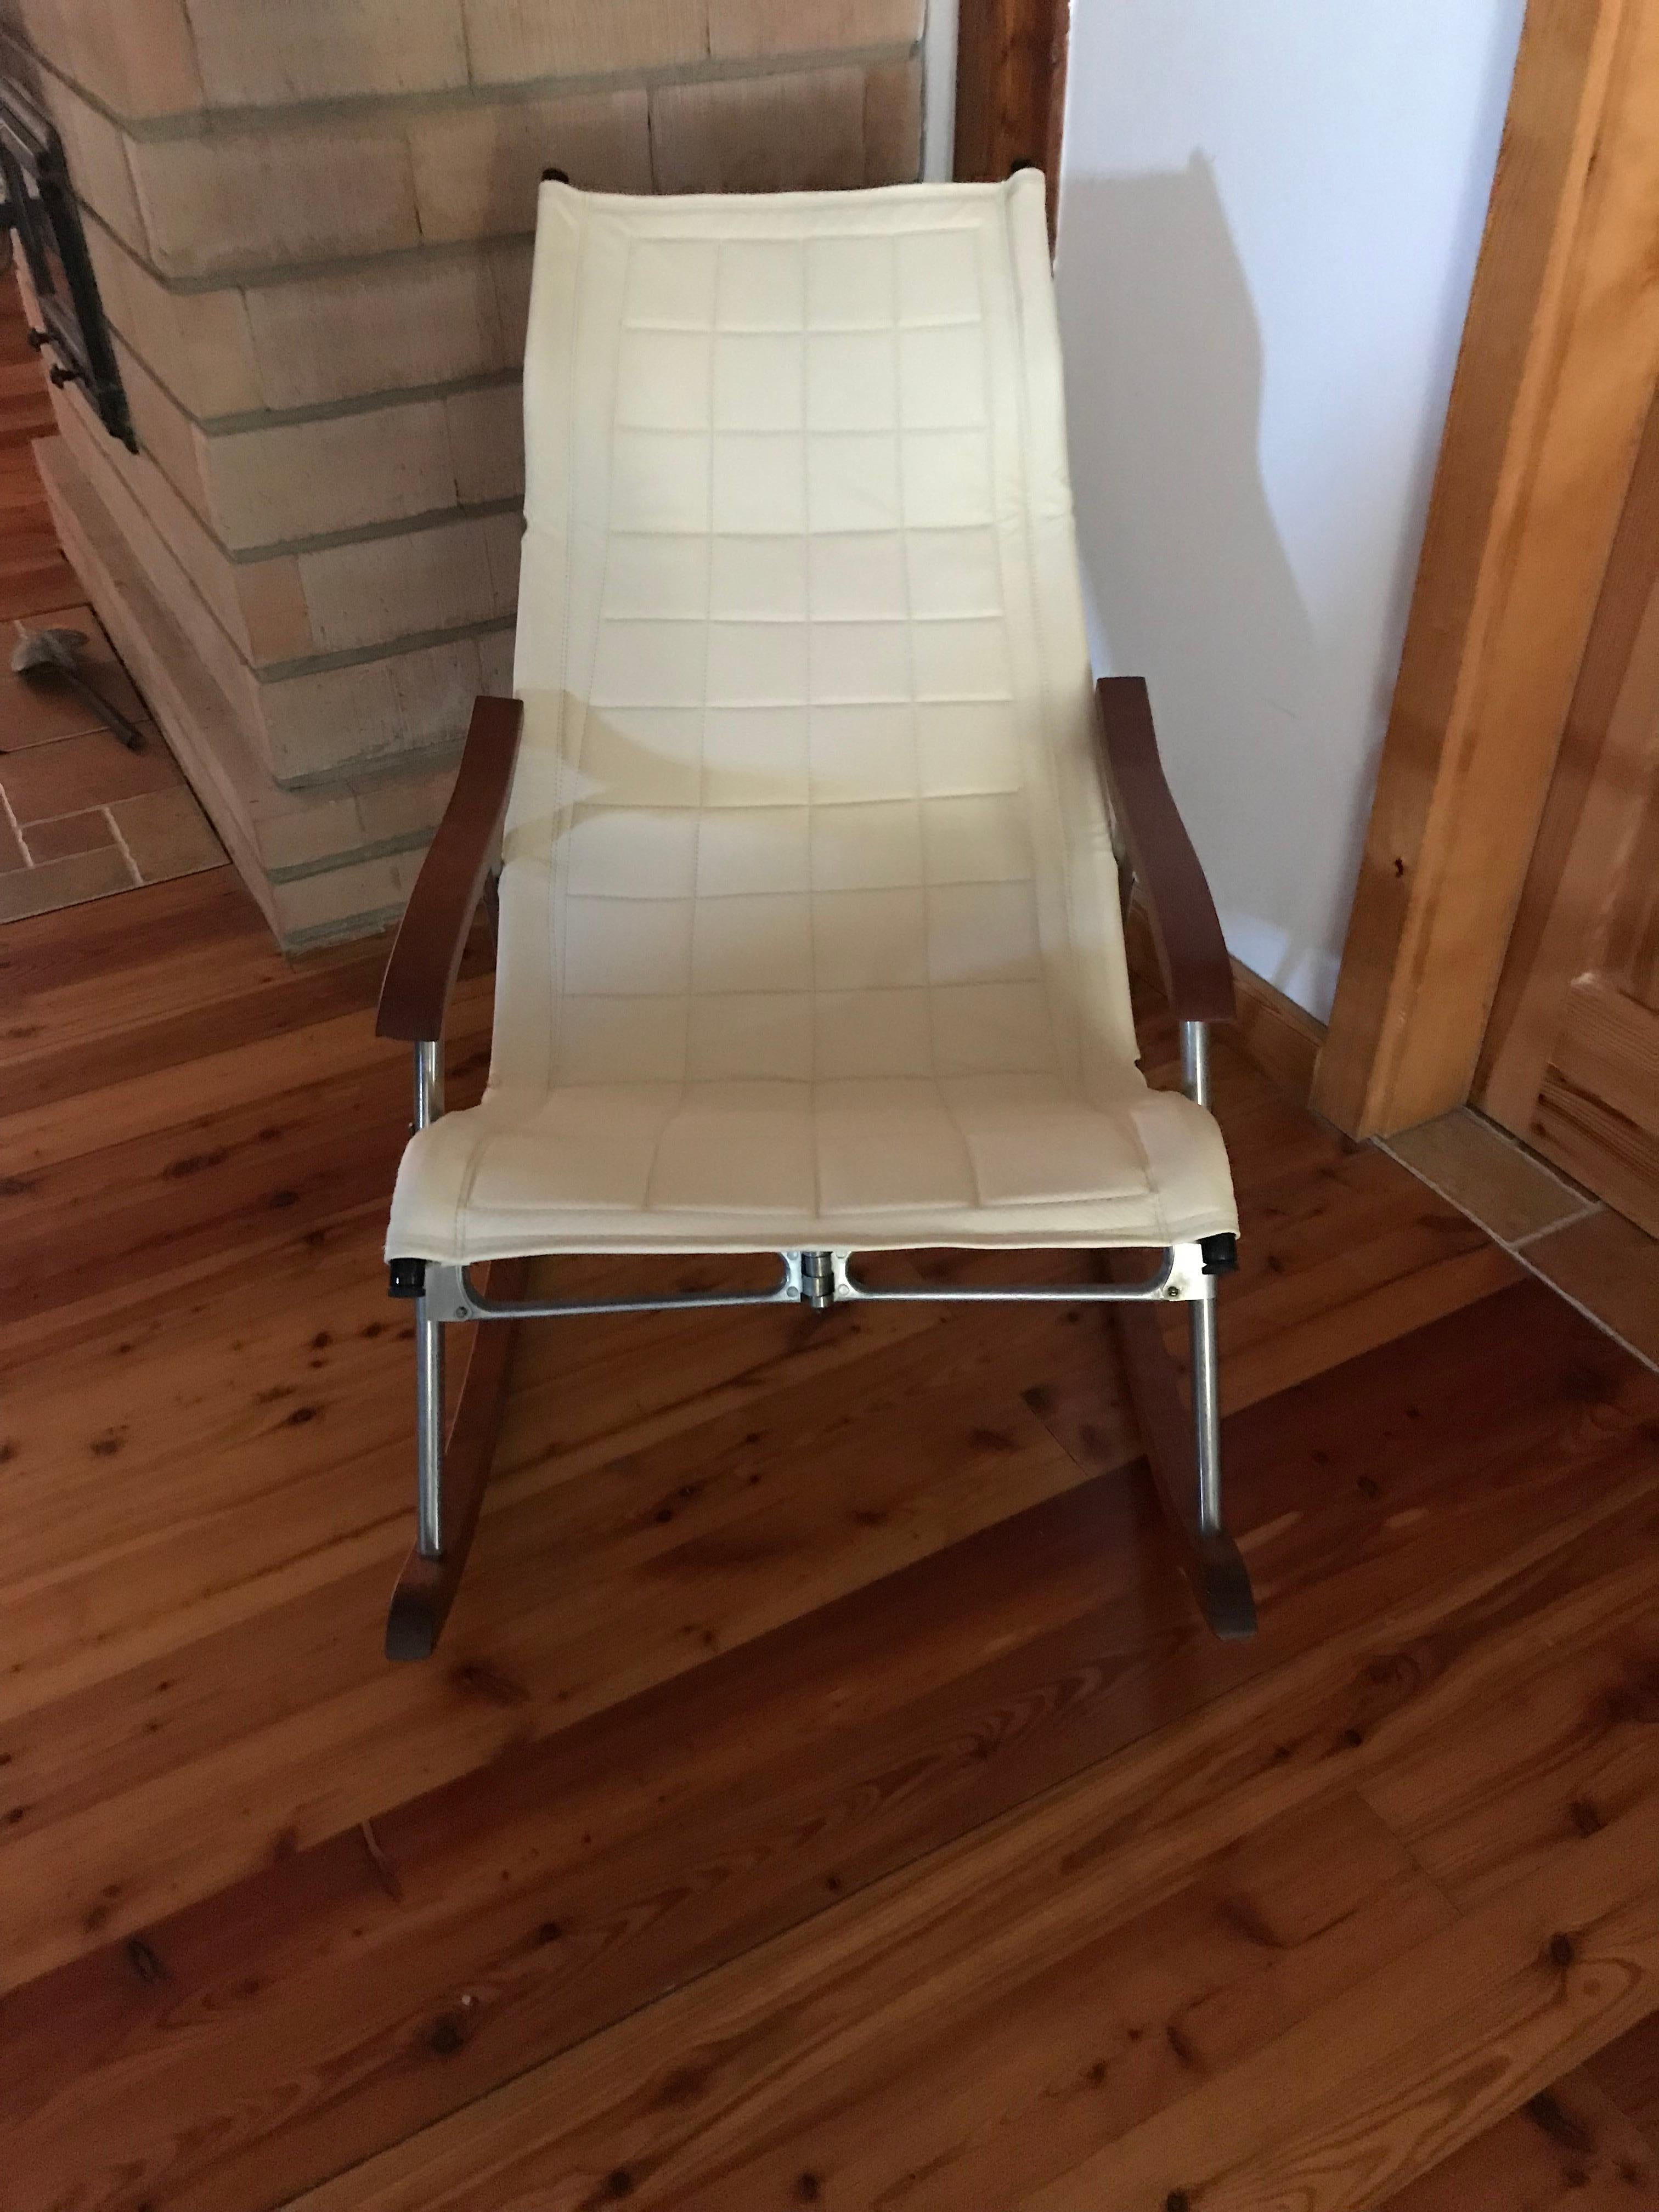 Midcentury Japanese rocking chair by Takeshi Nii
Designer: Takeshi Nii
1950-1959
Country of Manufacture: Japan
Attribution Marks This piece is a well-known design that is well documented in general design literature
Restored!!
Order time: 3-4